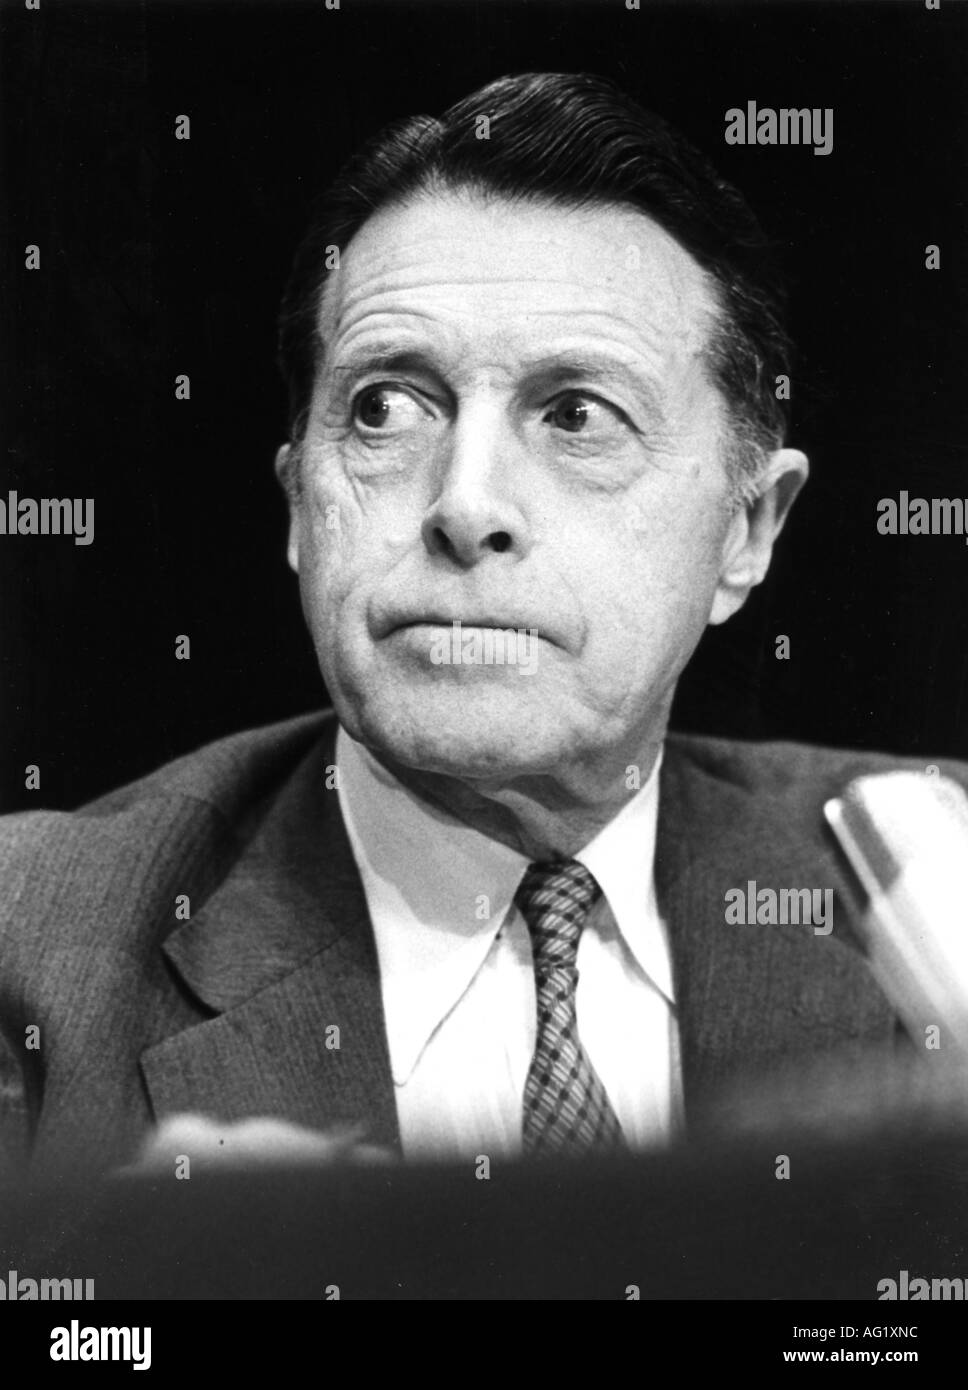 Weinberger, Caspar Willard 'Cap', 18.8.1917 - 28.3.2006, American politician, Secretary of State for Defense, portrait, at conference of nuclear planning group, Würzburg, 19.3.1986 - 21.3.1986, Stock Photo